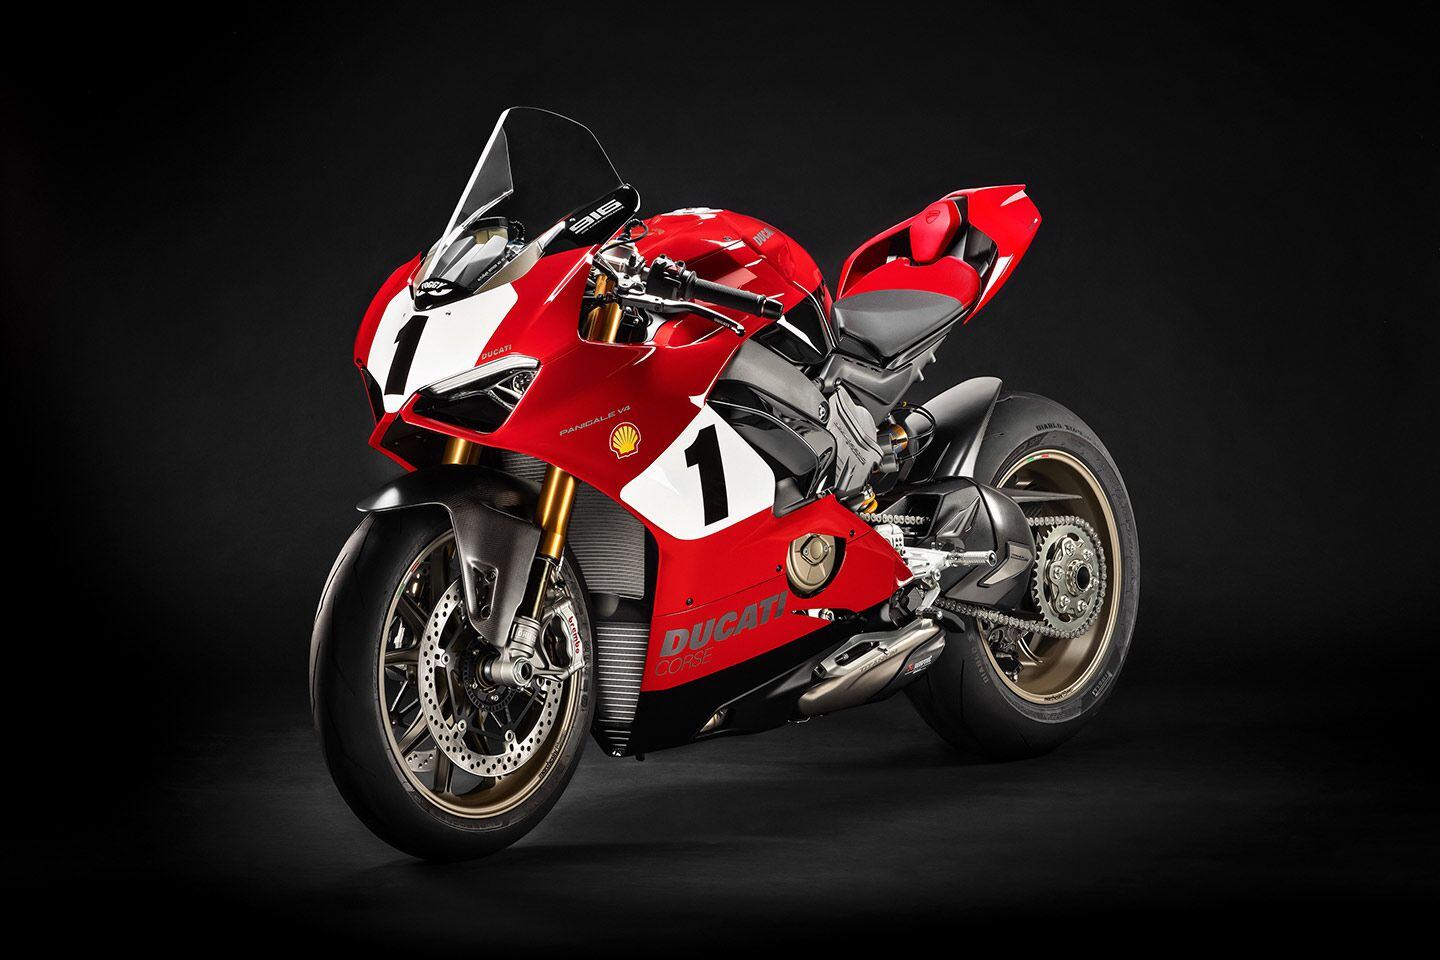 Five years ago, Ducati created a special 25th anniversary version of the Panigale and is expected to do so again to mark the 30th anniversary of the 916.